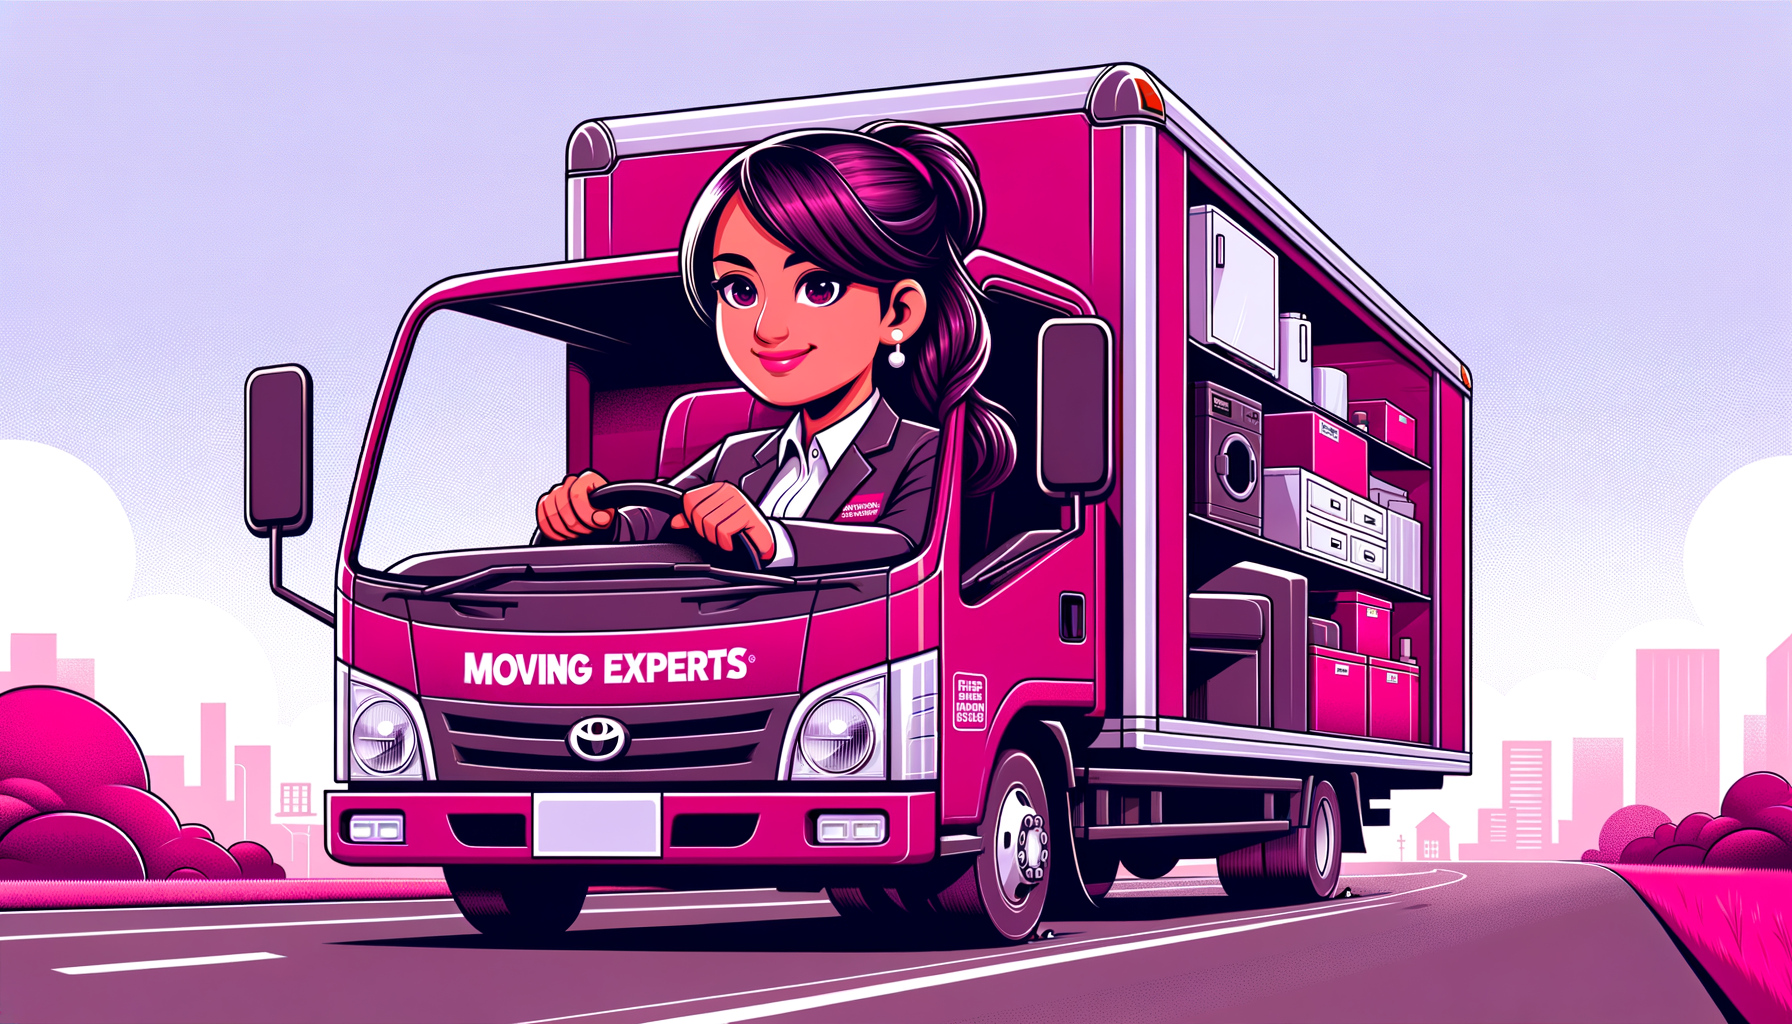 Cartoon-style fuschia colored car happily being towed on a sunny day, symbolizing hassle-free vehicle transportation by MovingExperts.